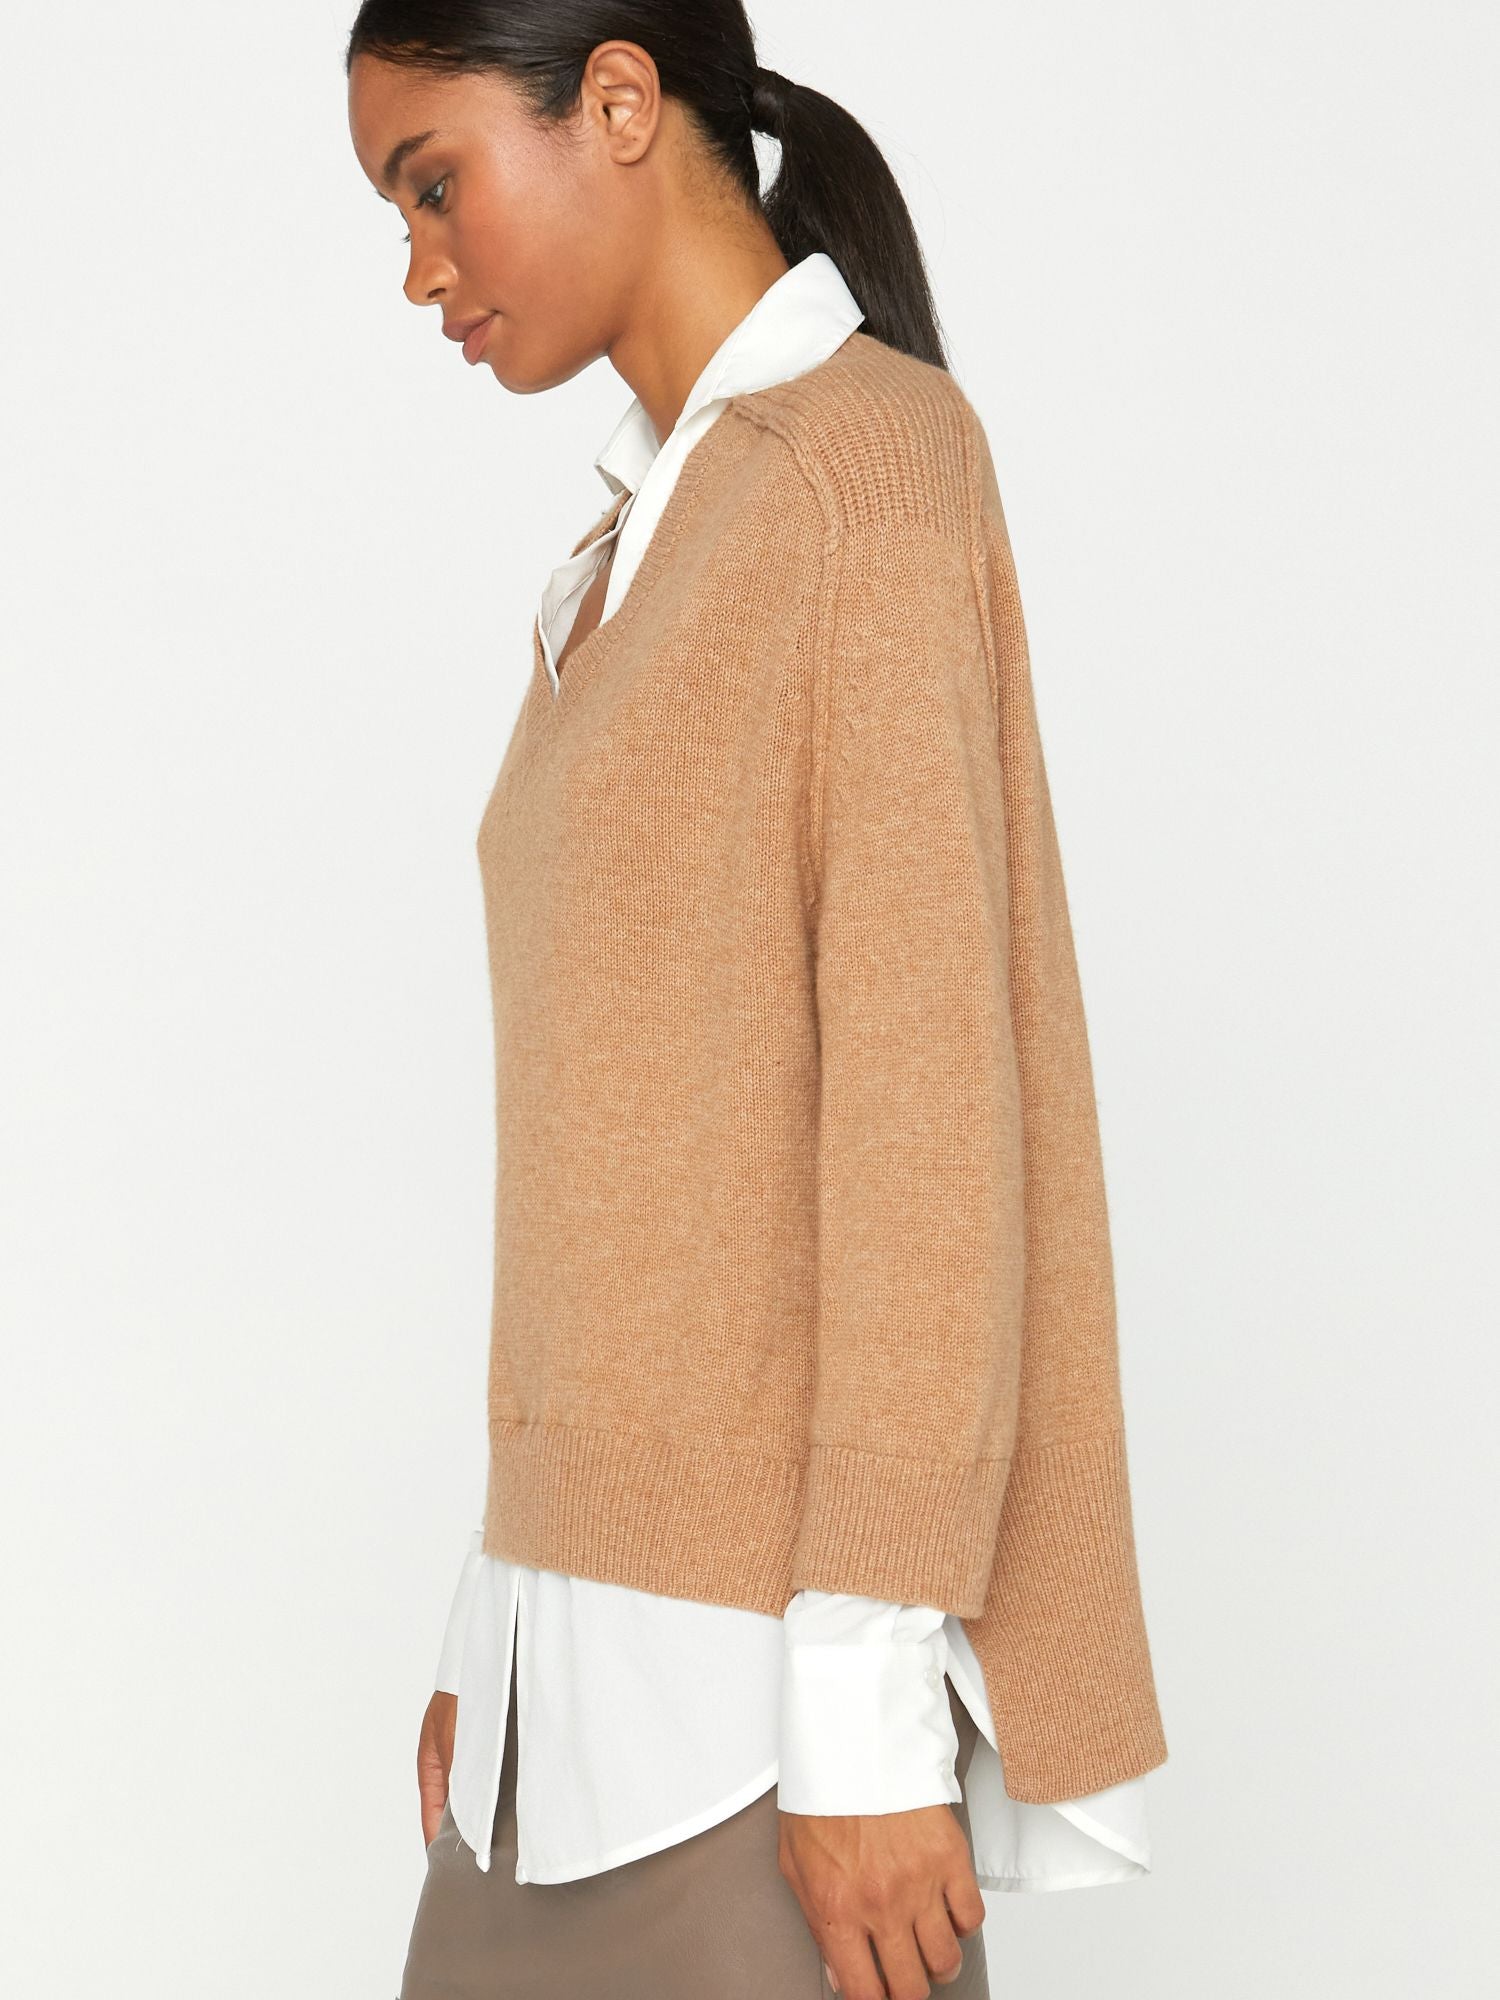 looker tan layered v-neck sweater side view 2